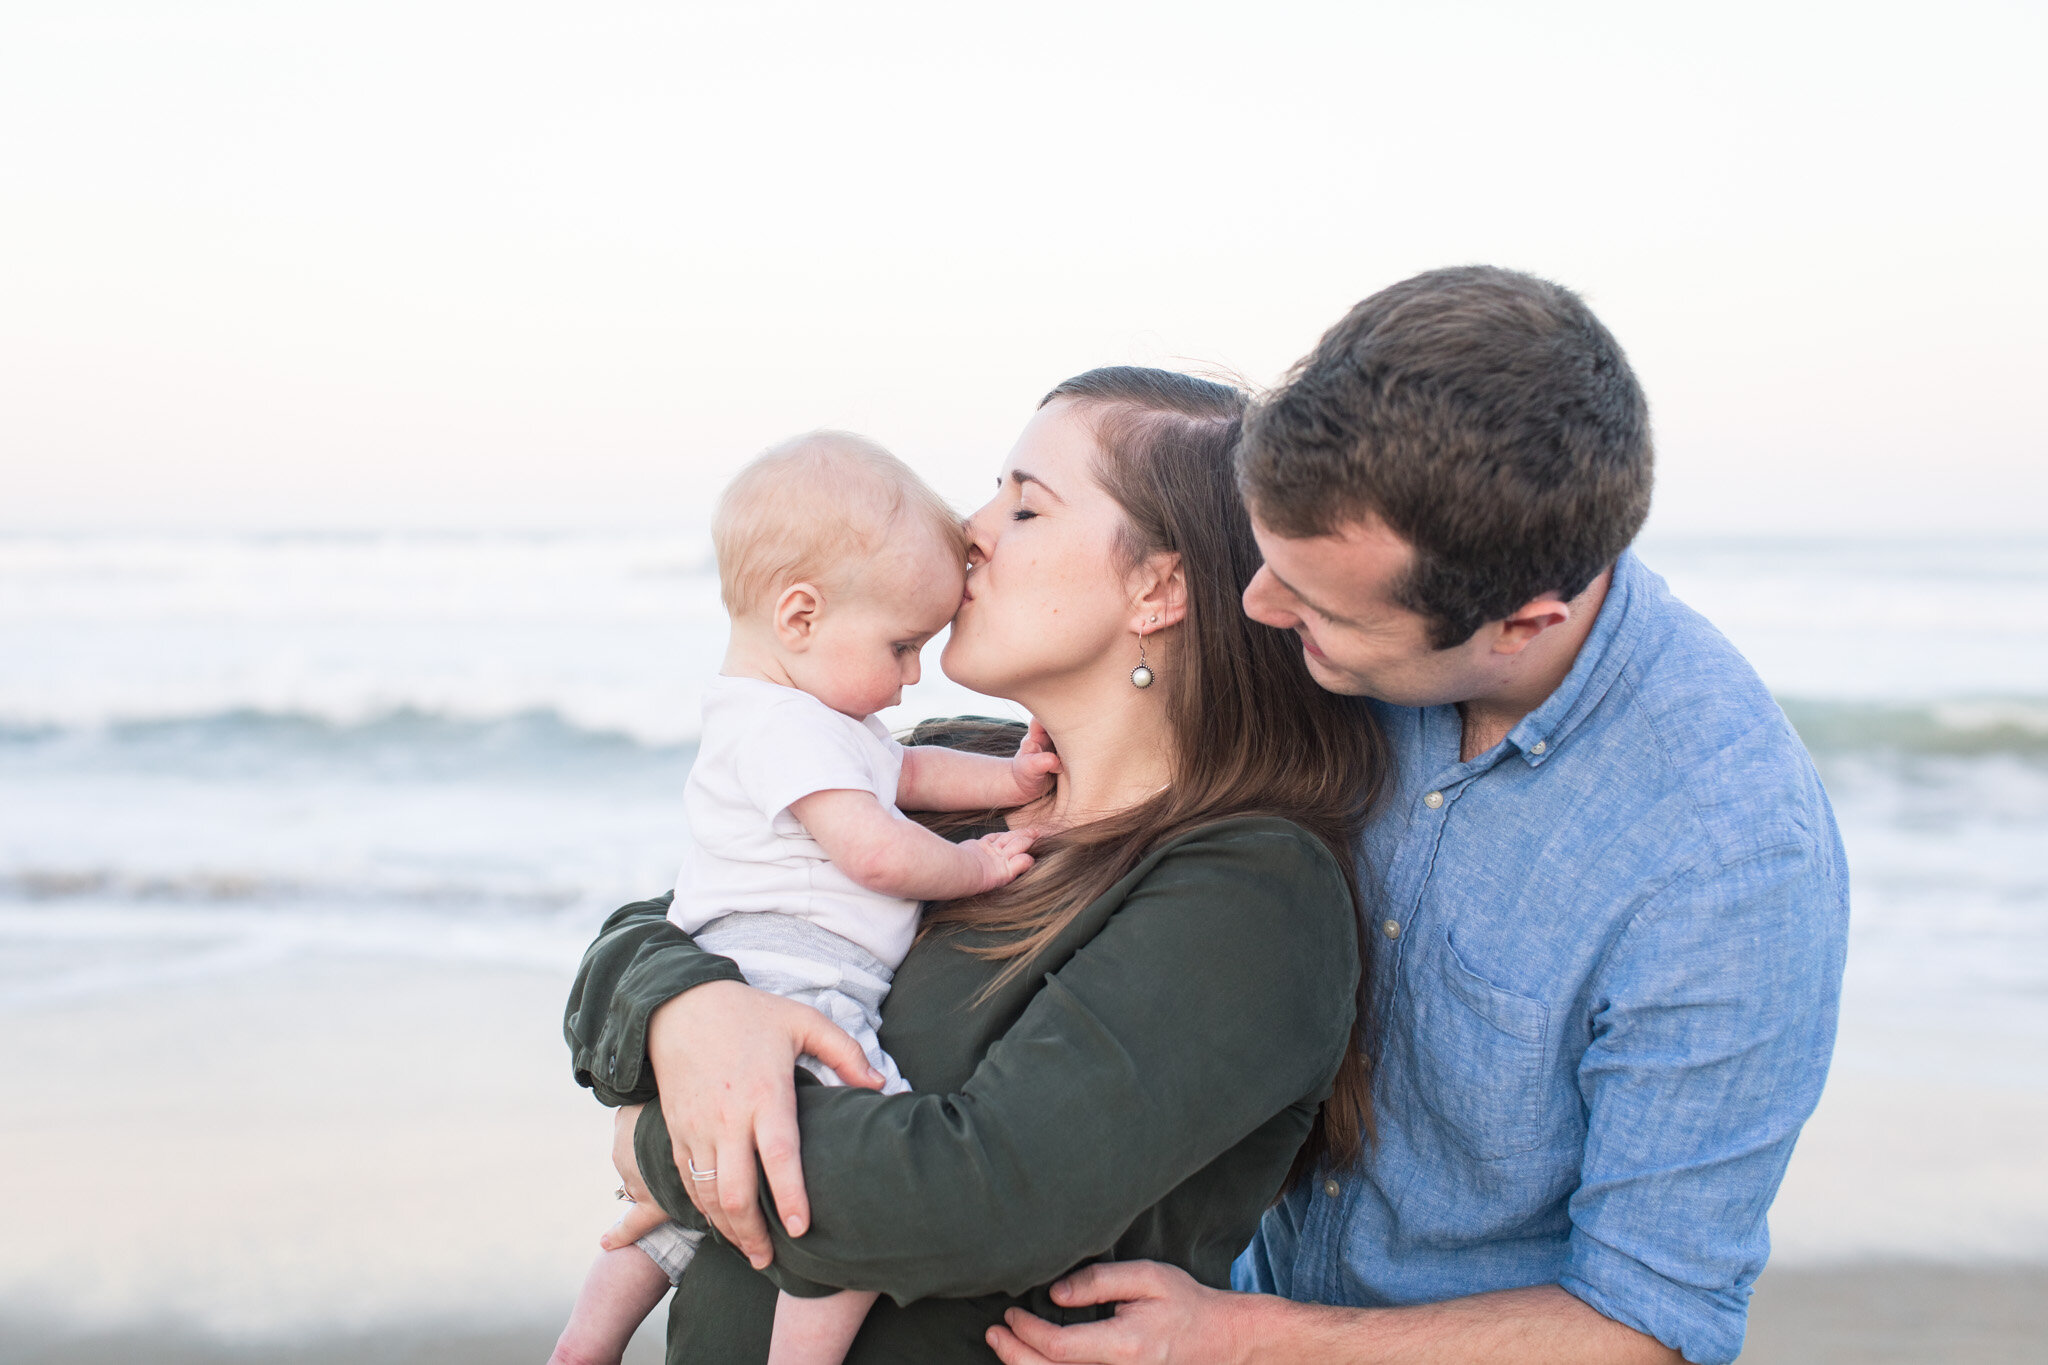 Haley &amp; Michael - James's 6 month Photo Session in the Outer Banks - Raleigh Baby Photographer